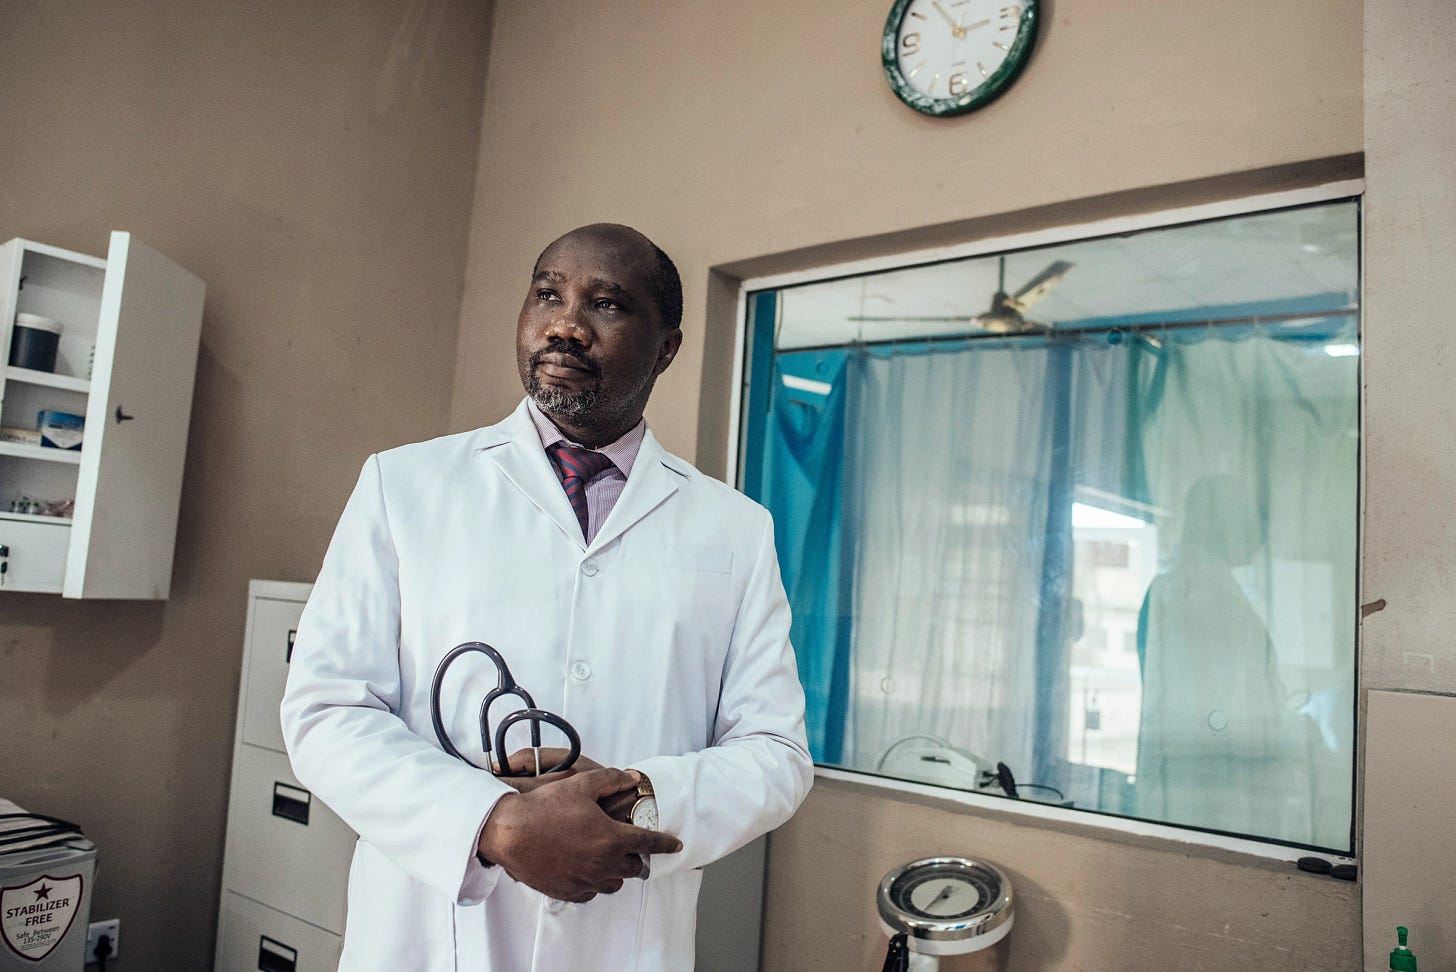 Dimie Ogoina, Nigerian professor of medicine, makes Time’s 100 most influential people list